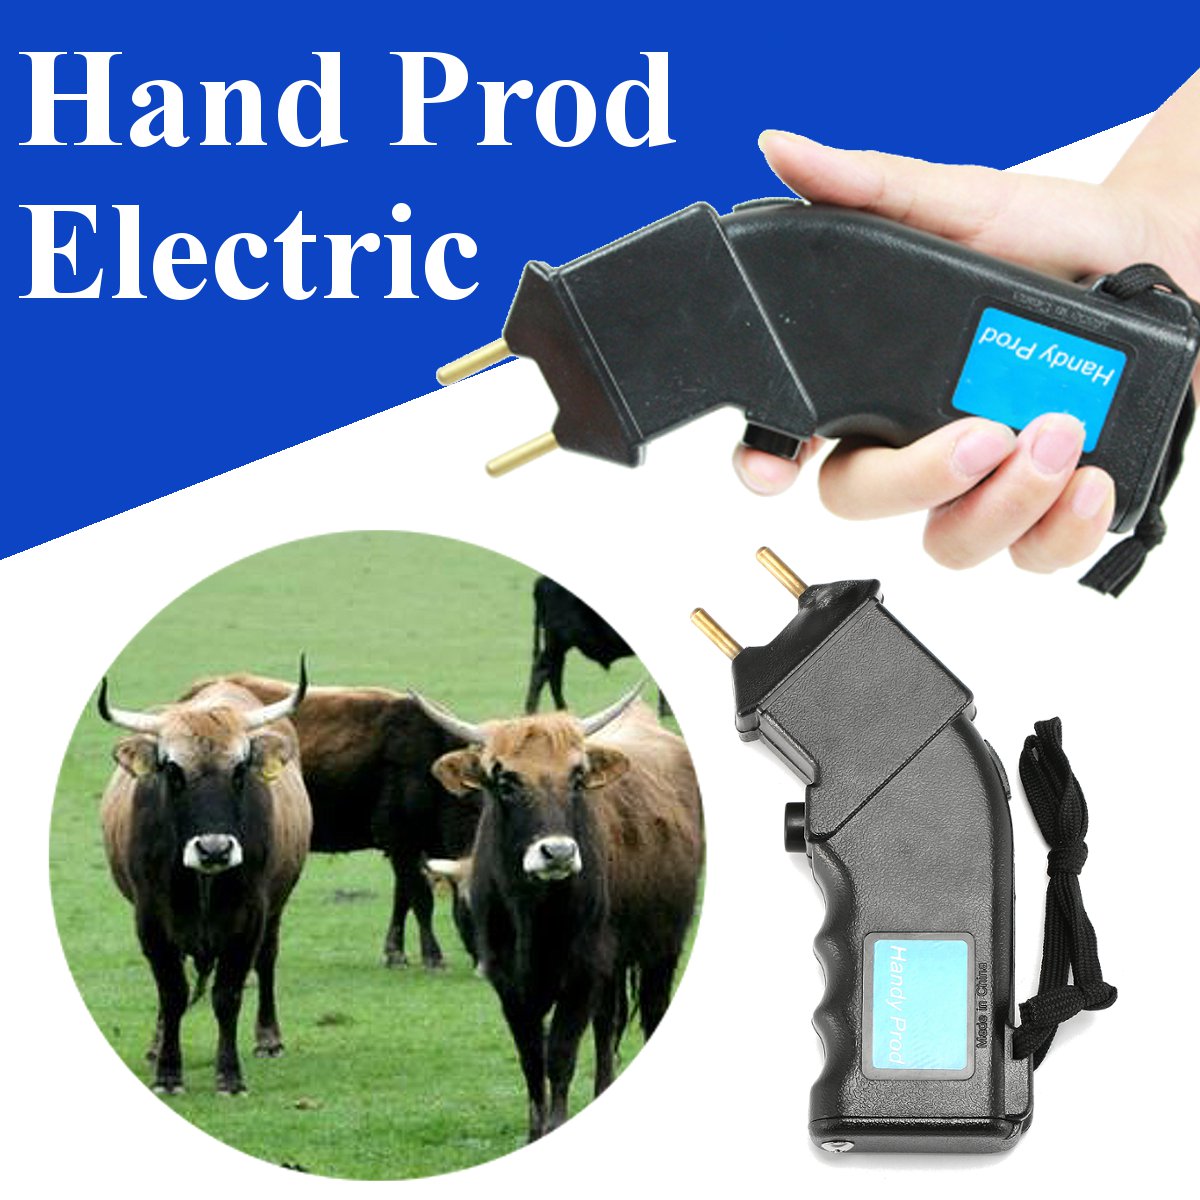 Electric Power Drive Hand Prod for Cattle Dogs Sheep Animals.